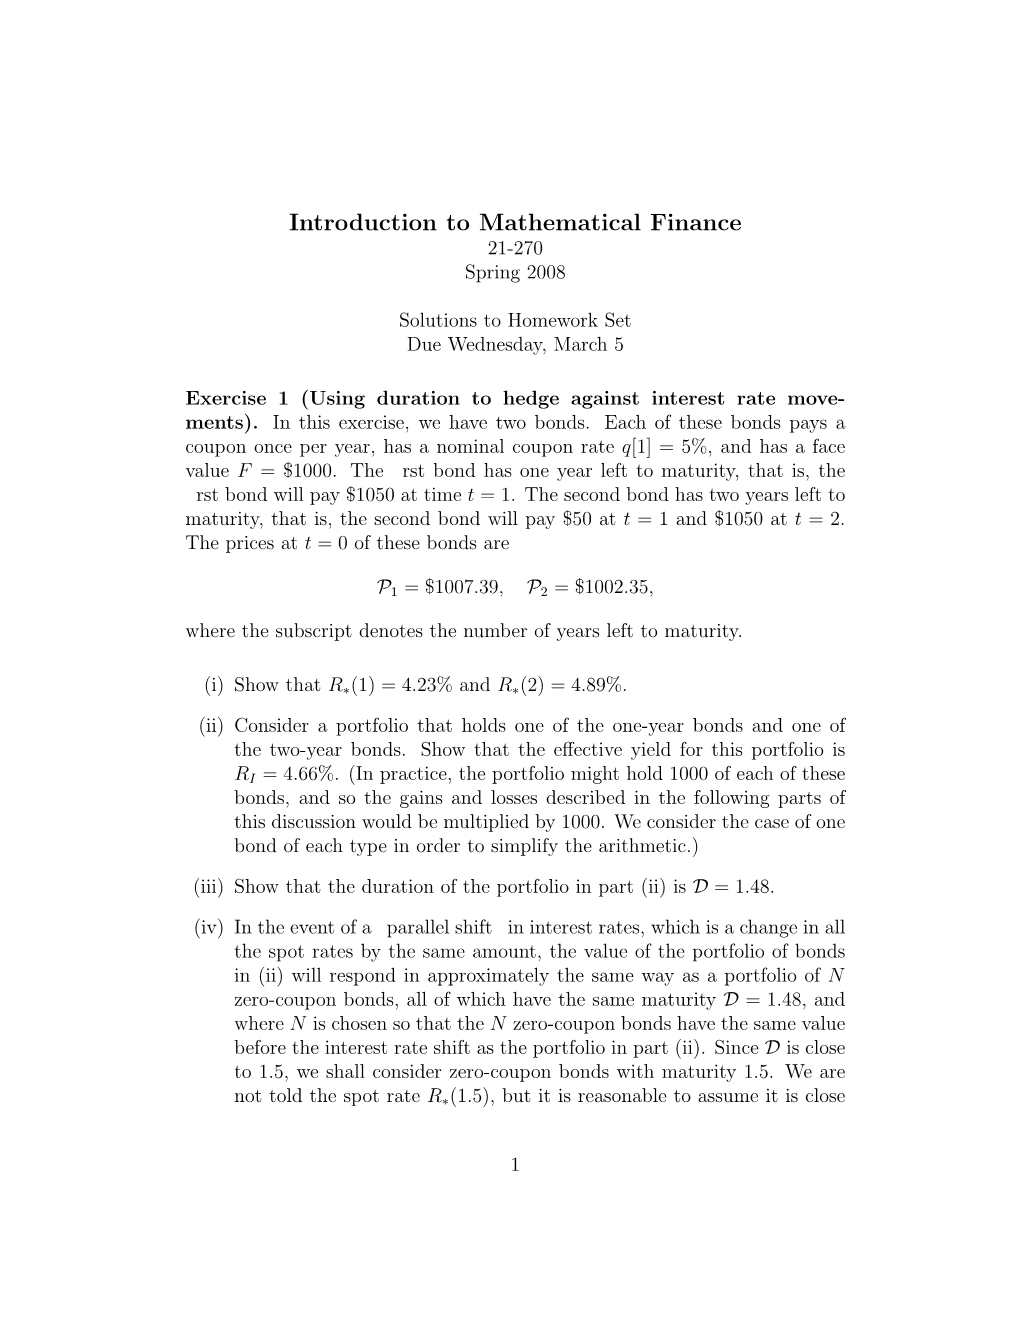 Introduction to Mathematical Finance 21-270 Spring 2008